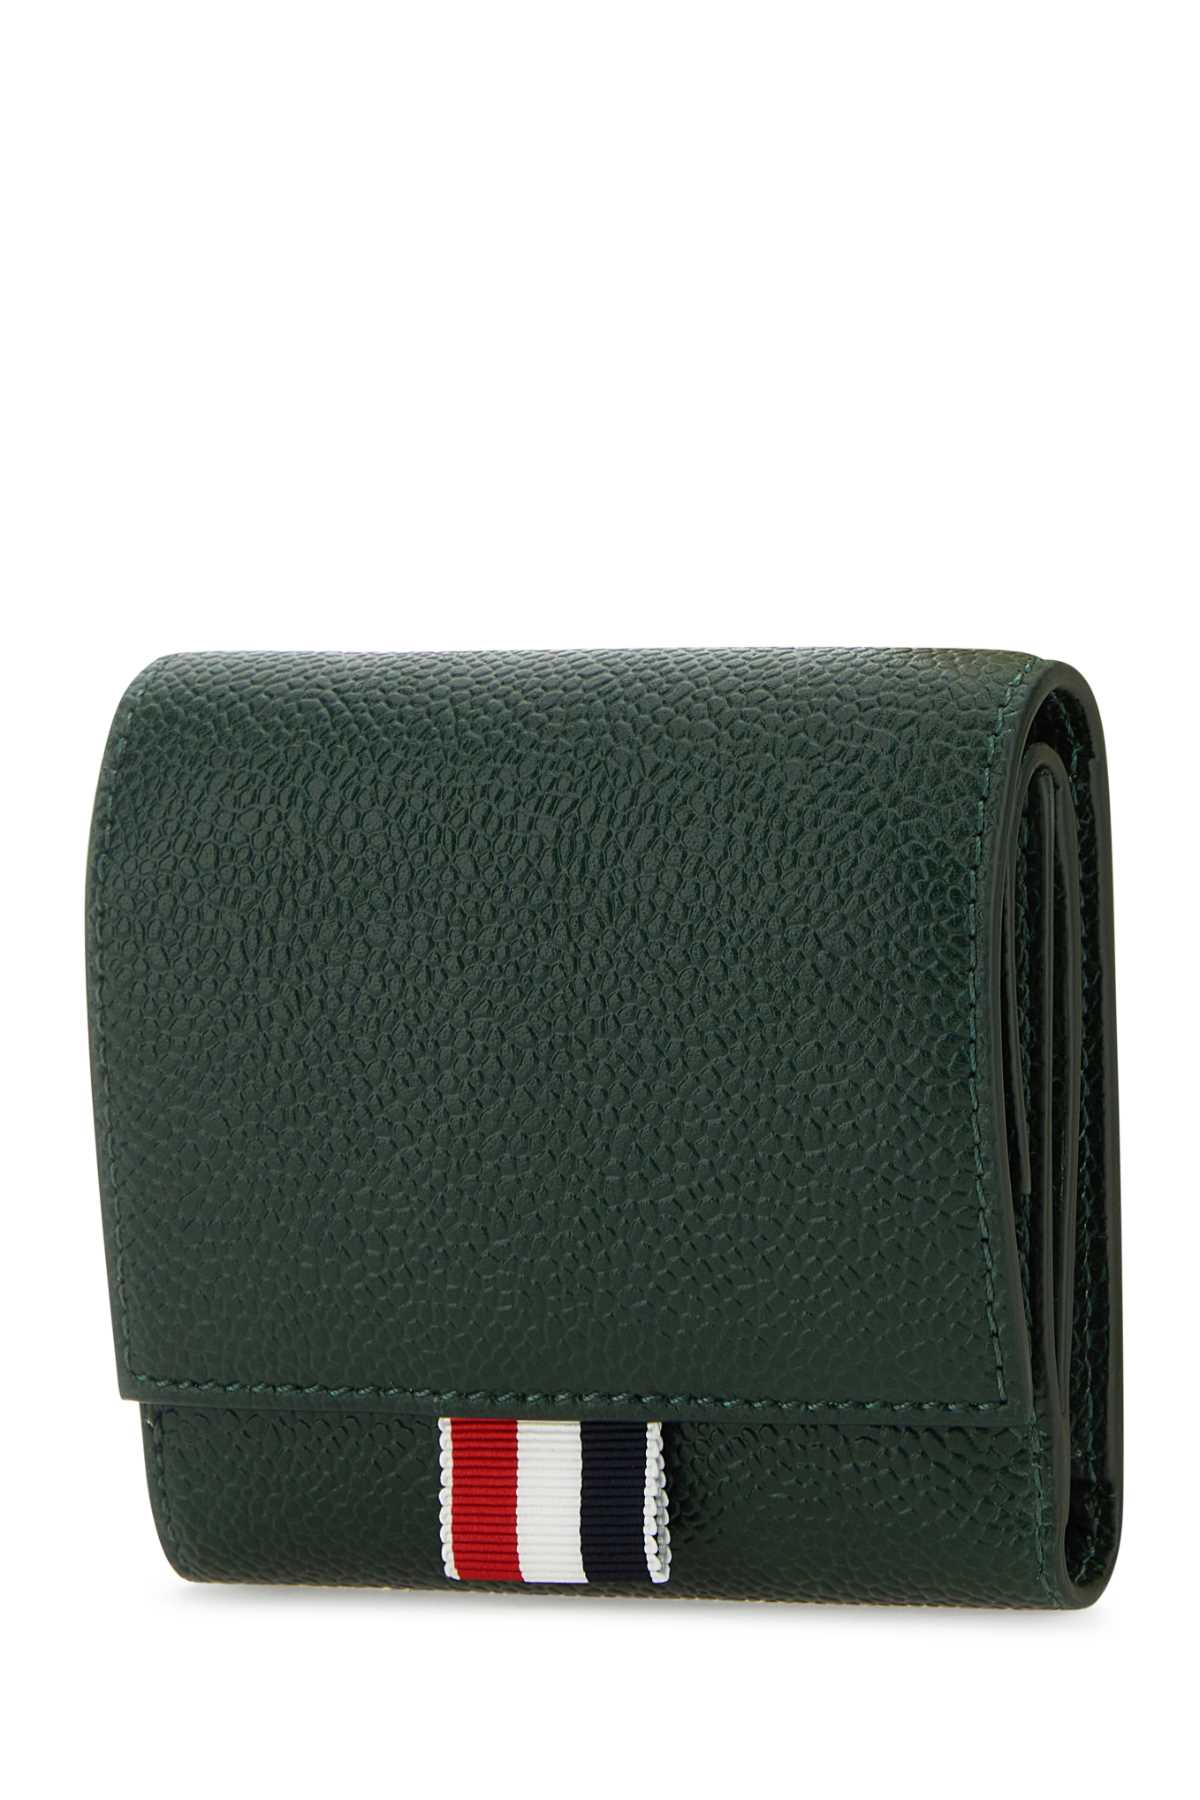 THOM BROWNE BUTTALE GREEN LEATHER WALLET